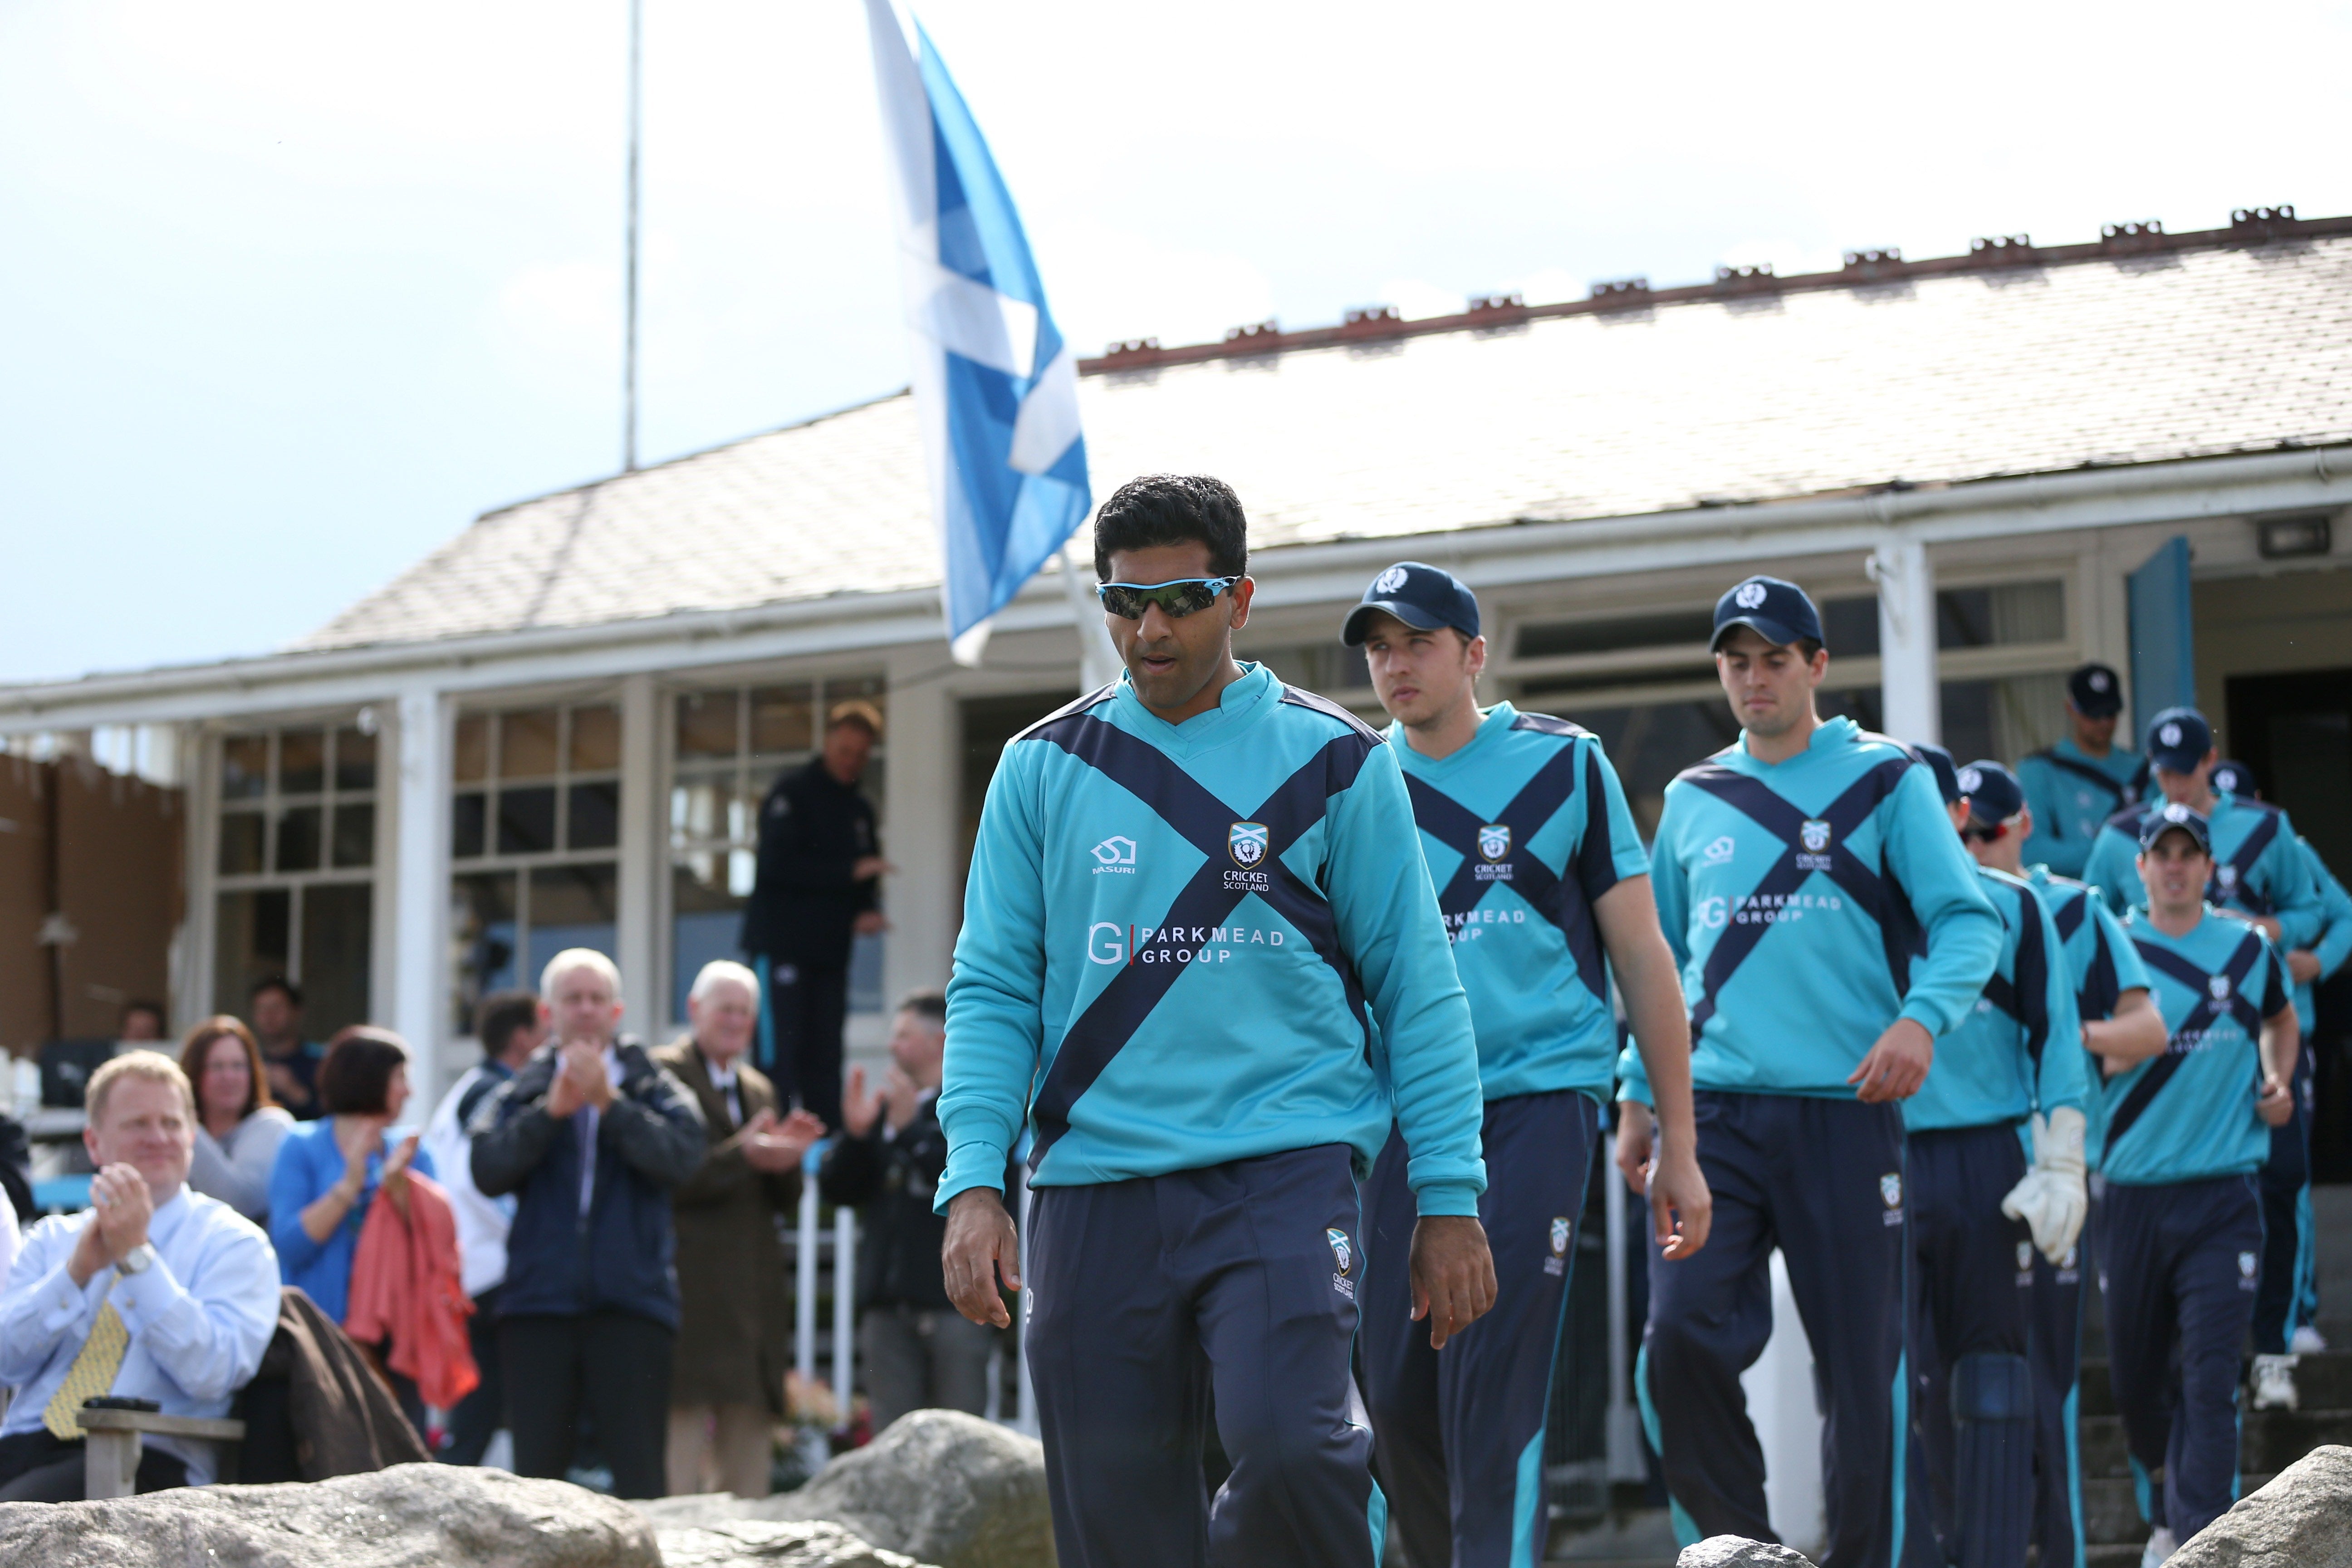 Majid Haq accused Cricket Scotland of being ‘institutionally racist’